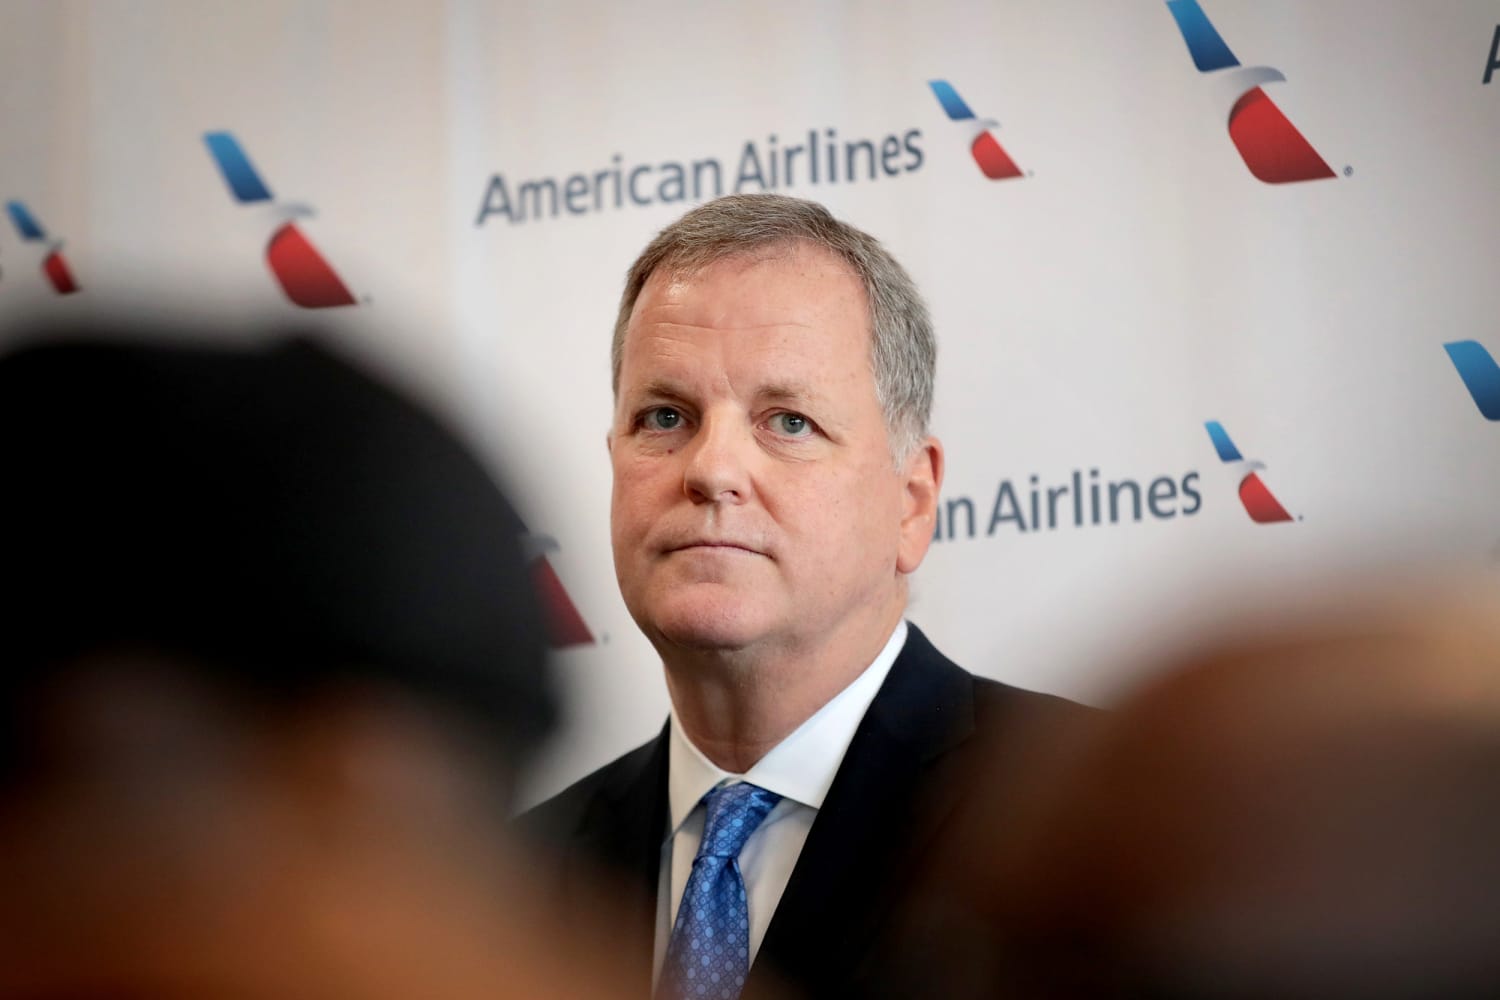 American Airlines CEO Doug Parker to retire, after 20 years at helm